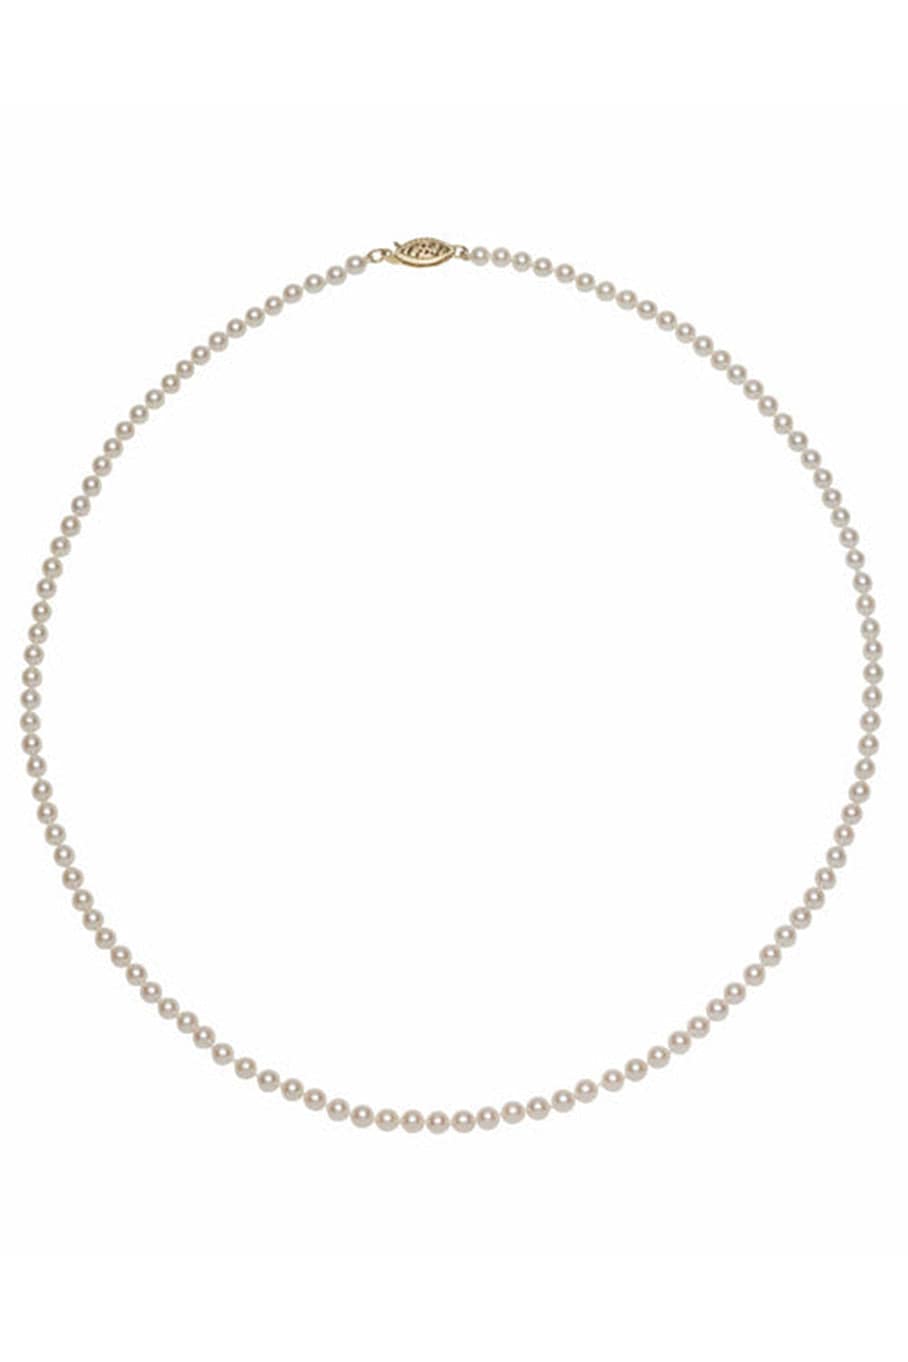 BAGGINS-Akoya Pearl Necklace - 4mm - Yellow Gold-YELLOW GOLD